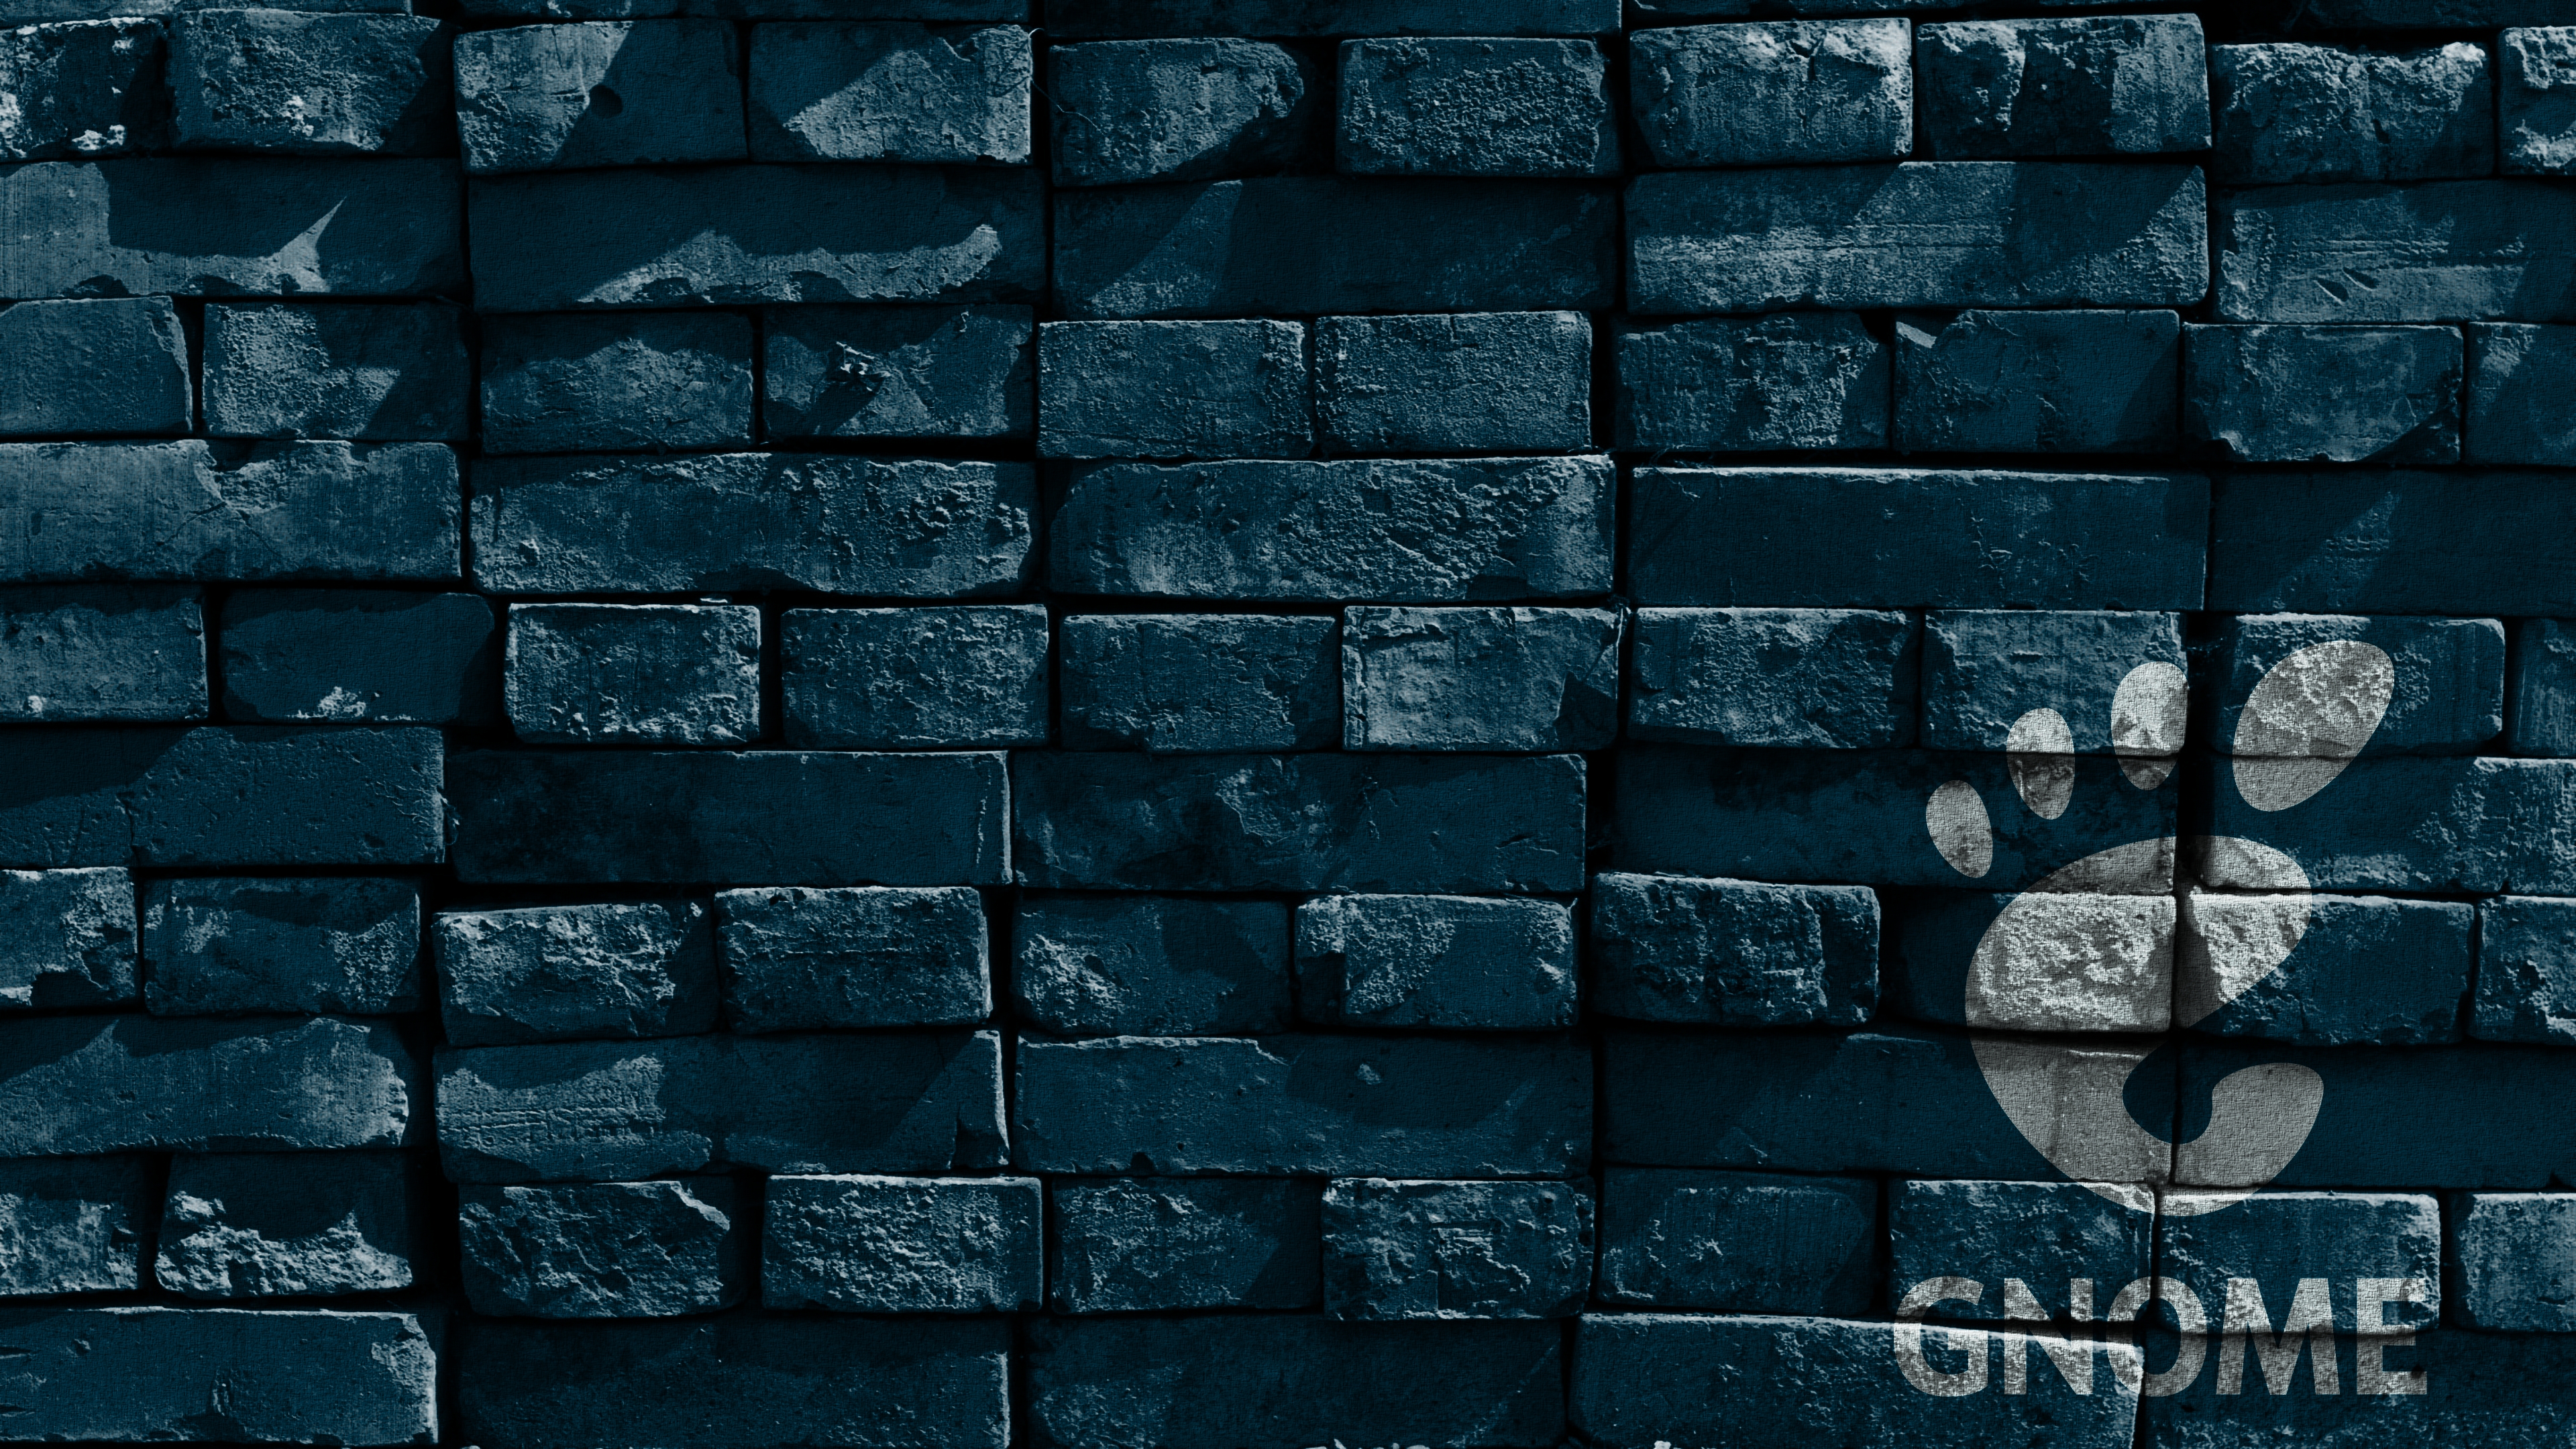 General 3840x2160 GNOME Linux wall bricks operating system